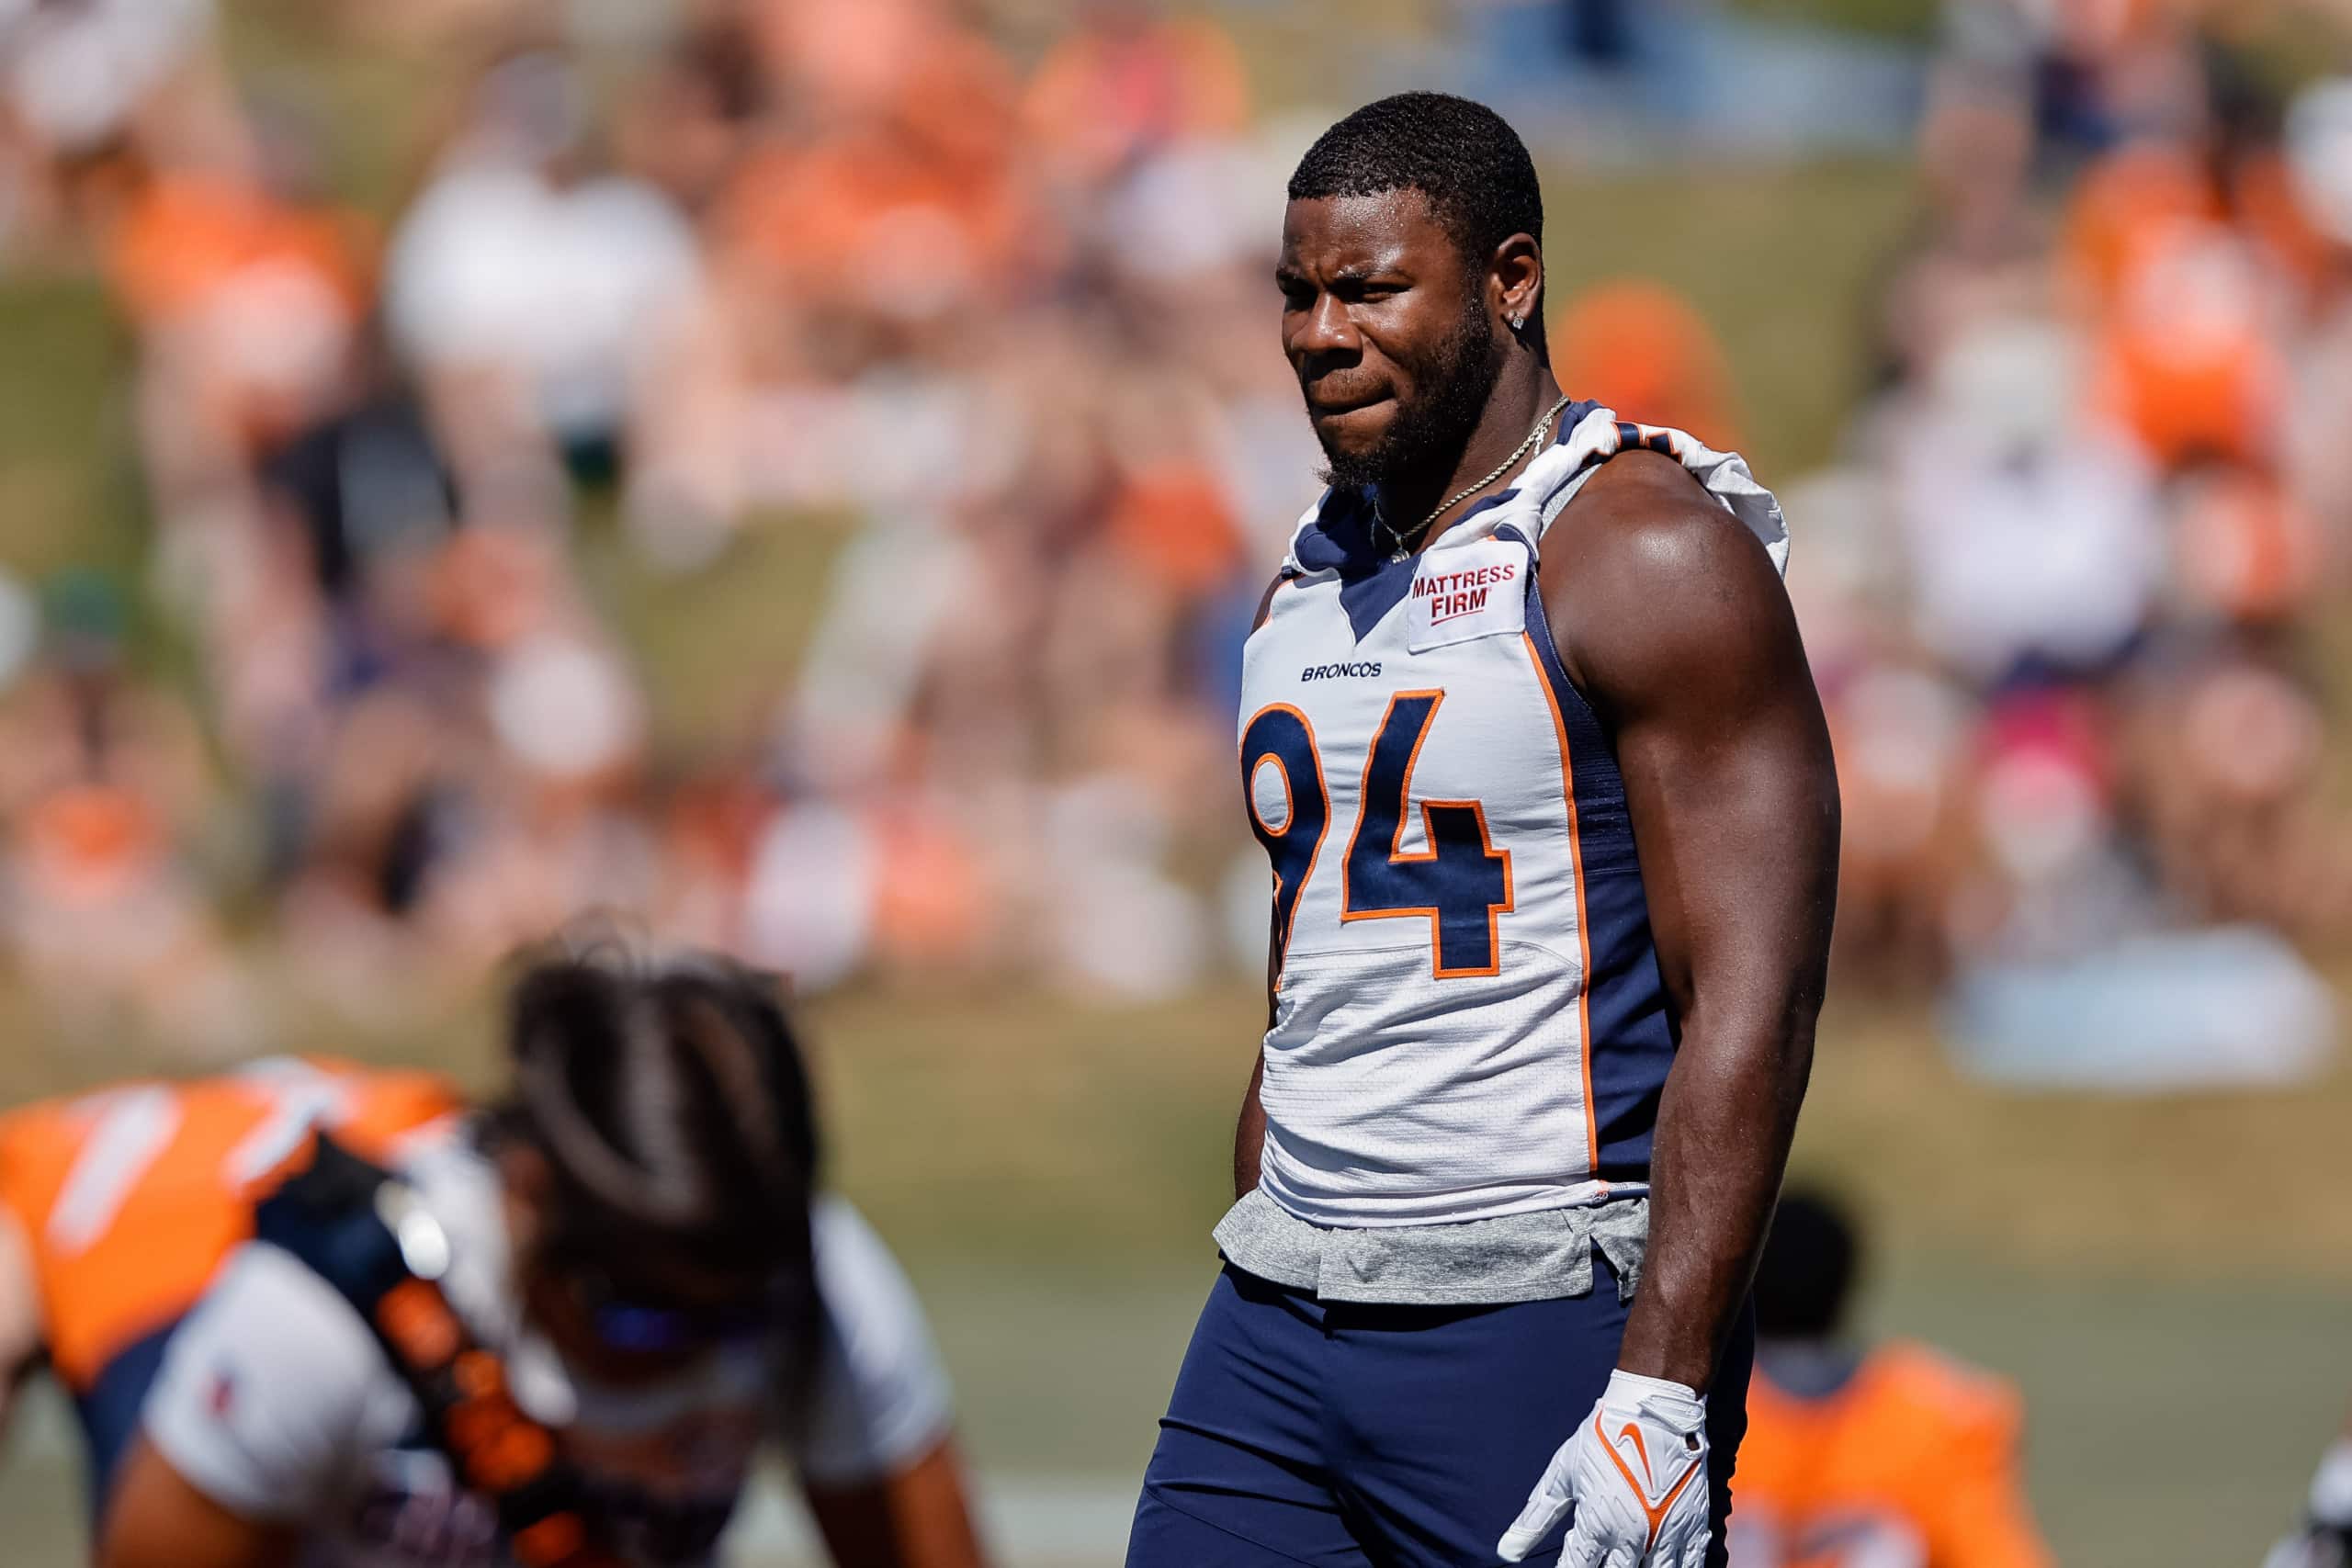 Denver Broncos linebacker Aaron Patrick looks into the distance during a NFL pre season practice